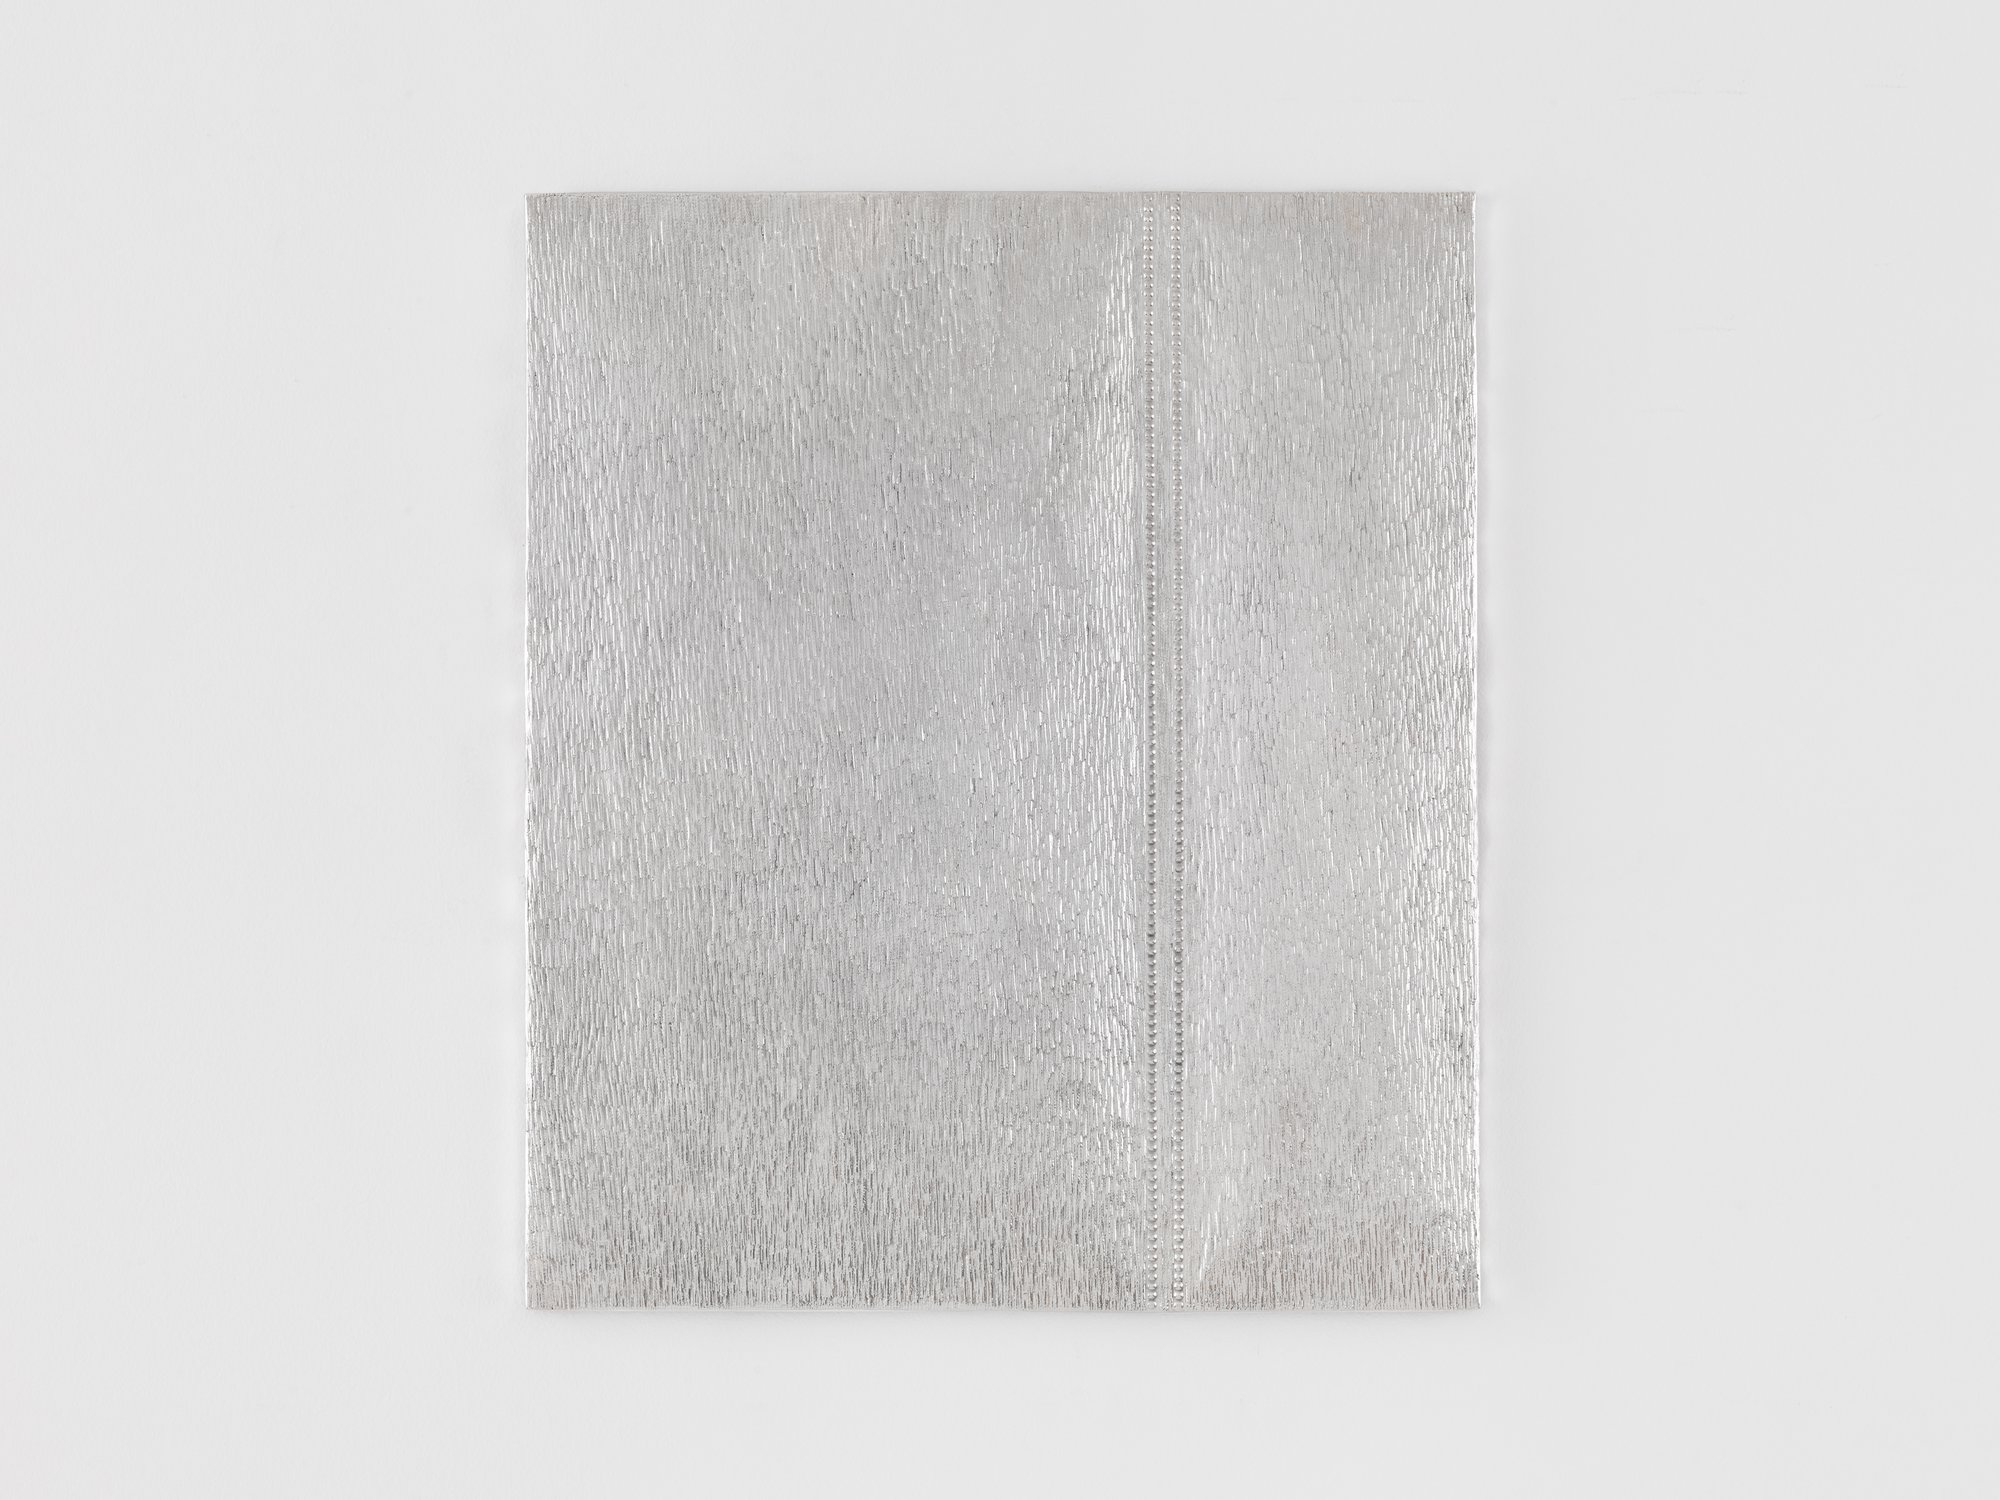 Christodoulos Panayiotou, Untitled, sterling silver repoussé and chased revetment, cast sterling silver nails, wood panel, 74 x 63 cm, 2020